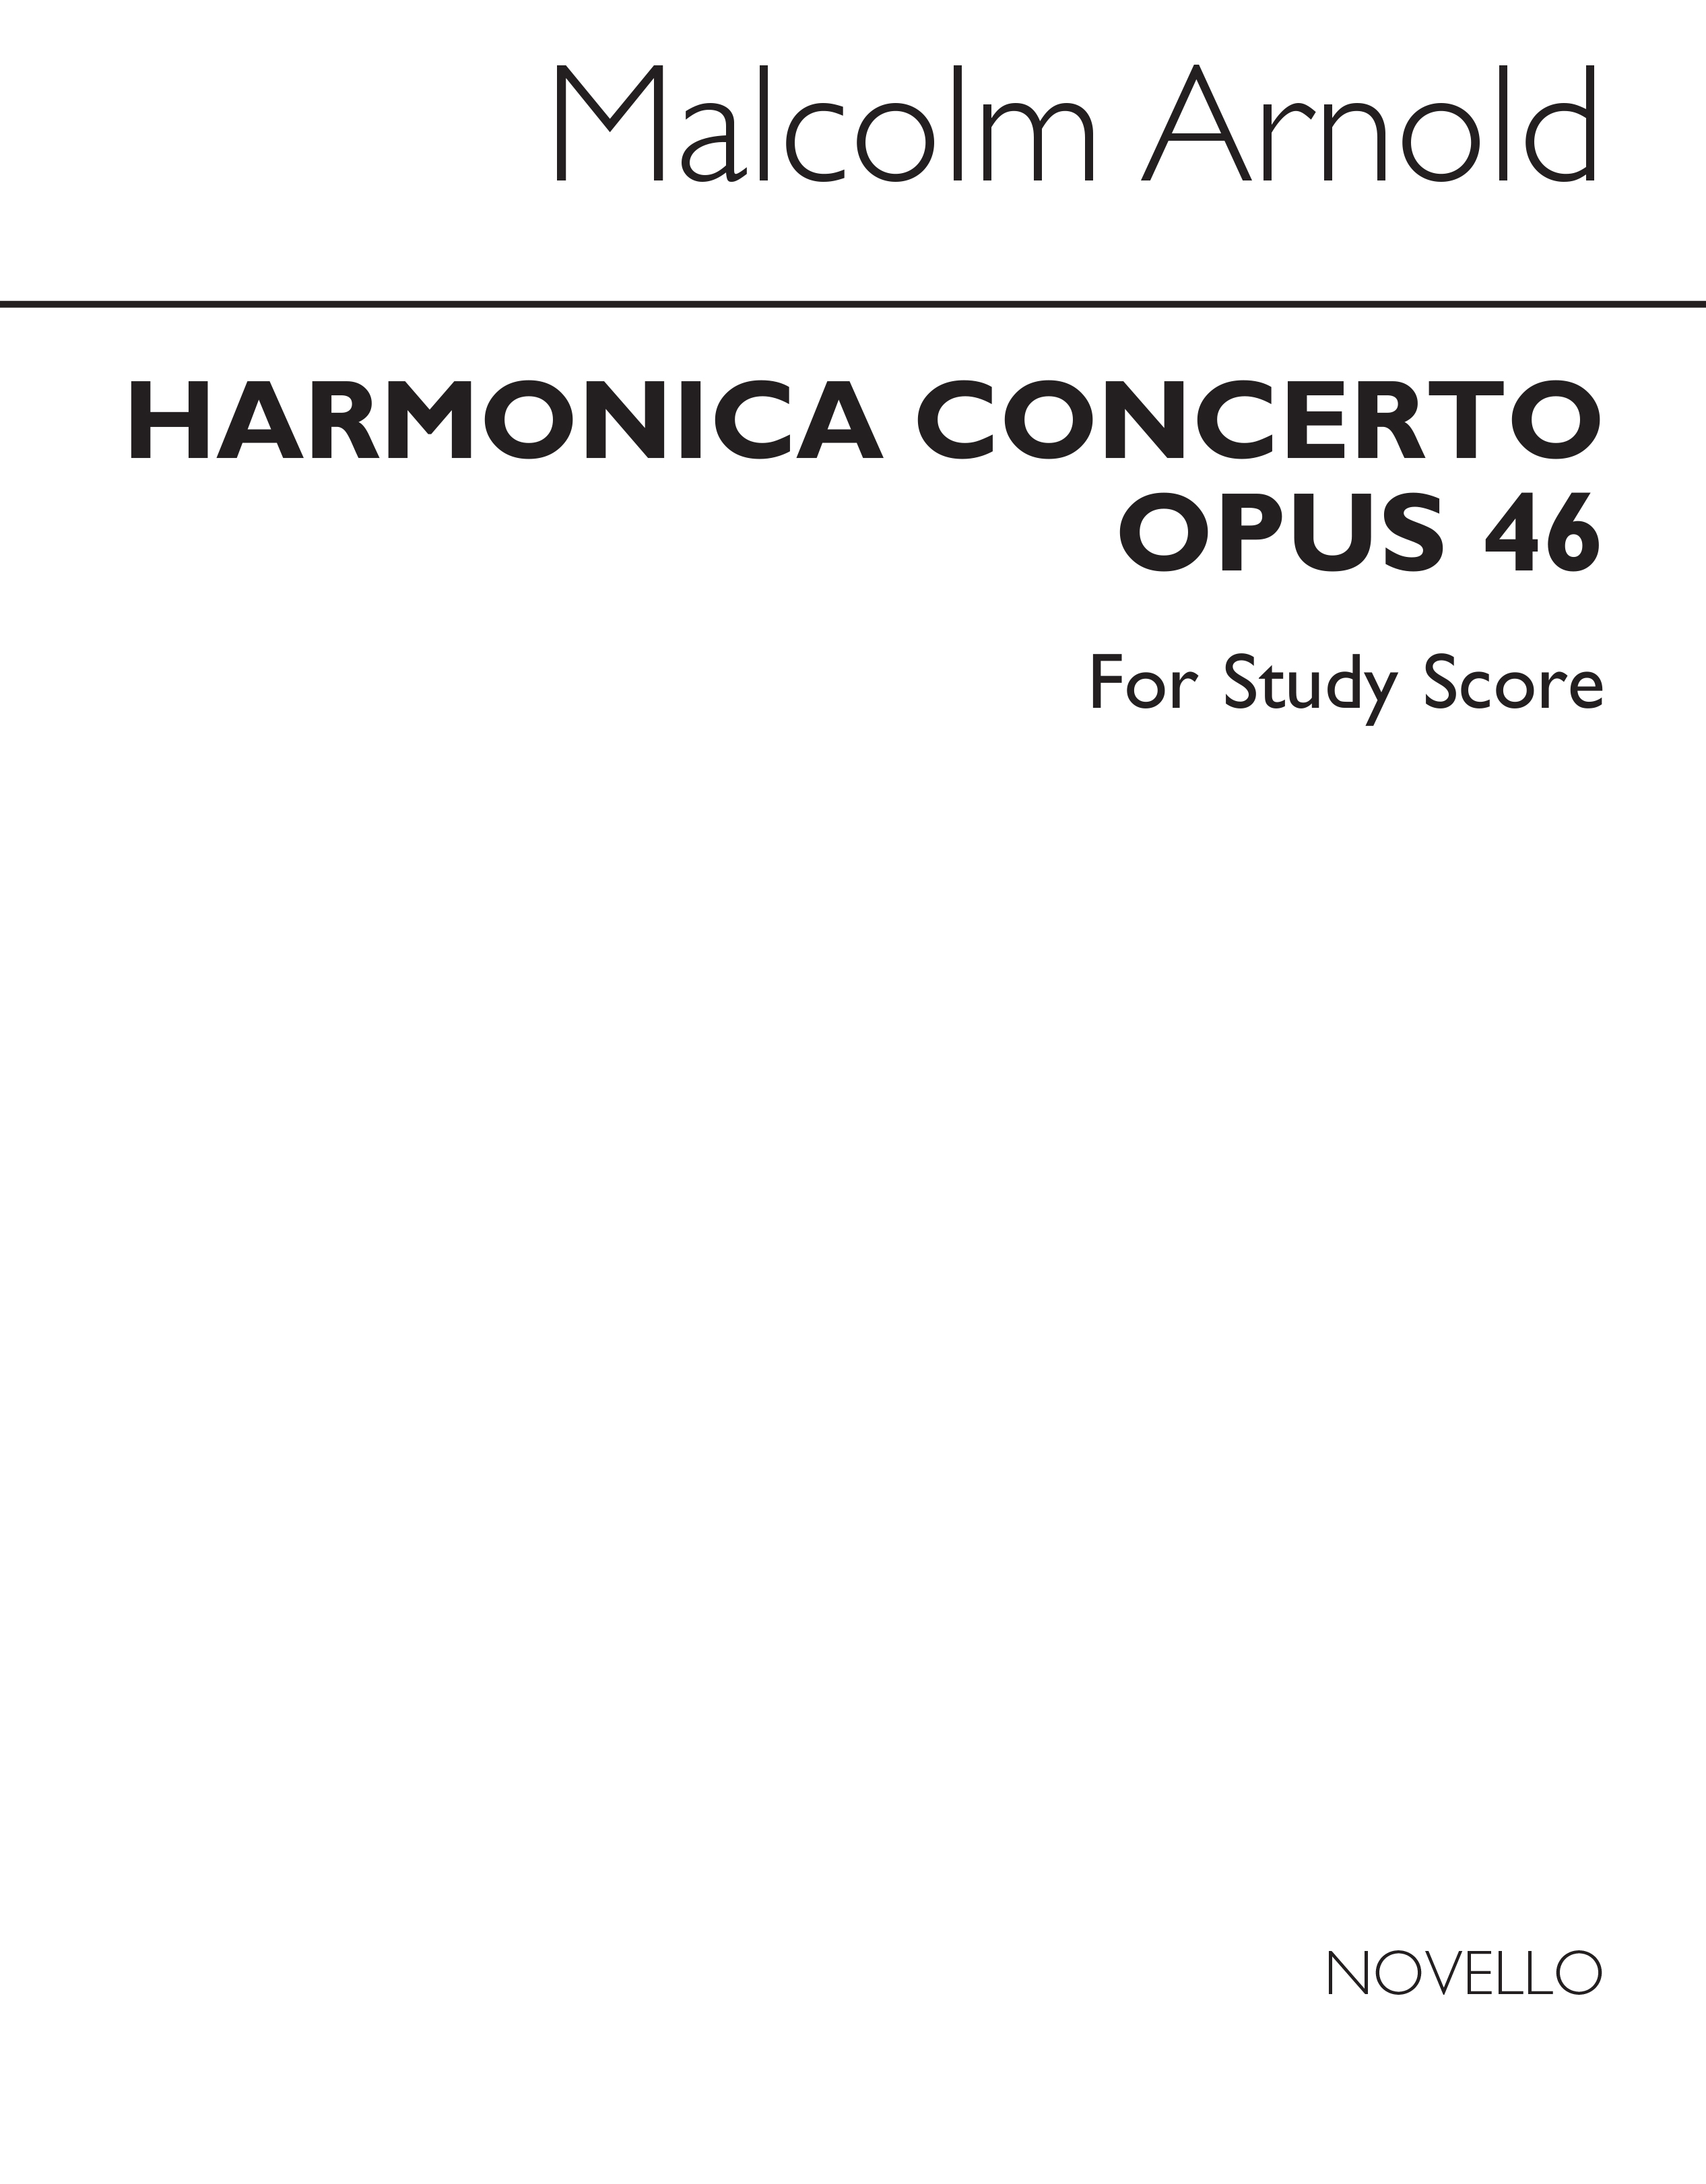 Malcolm Arnold: Concerto For Harmonica And Orchestra Op.46 (Score)